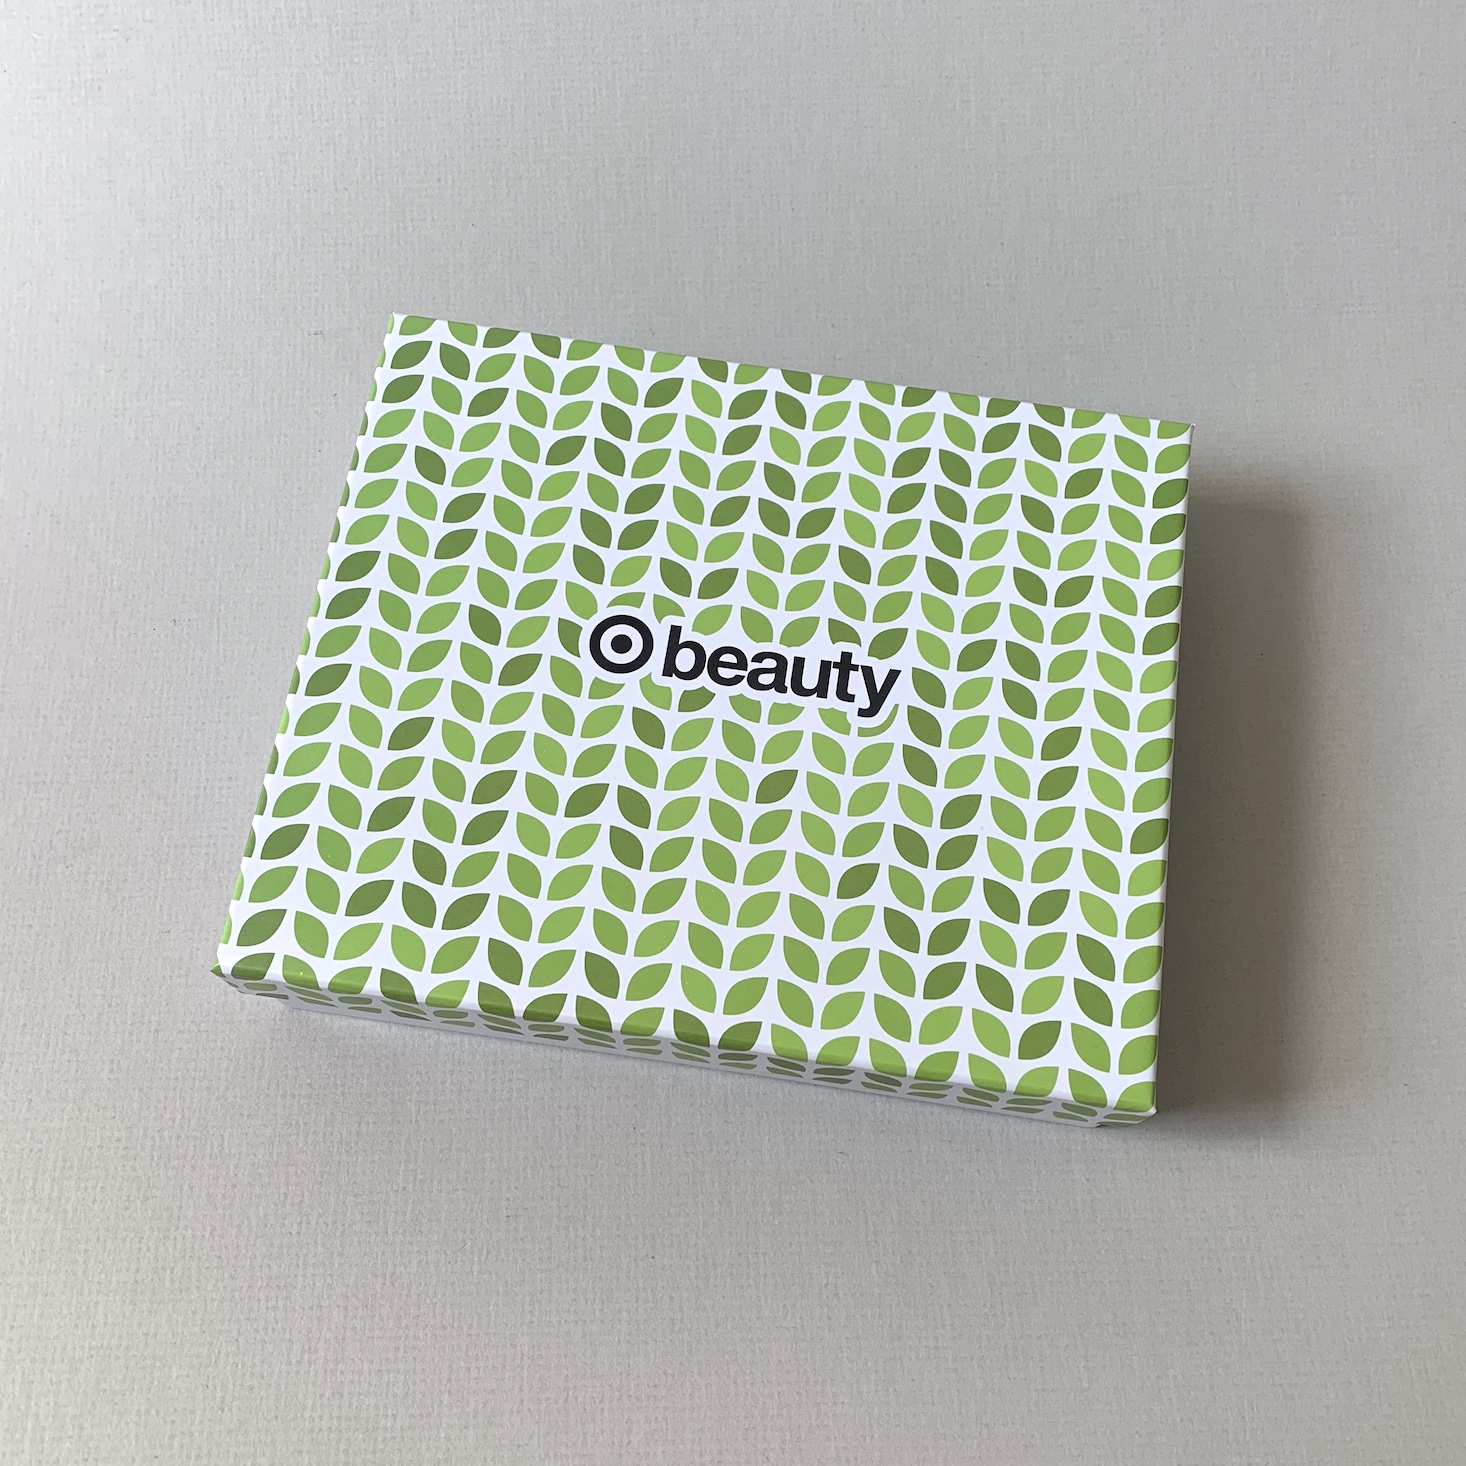 Target Beauty Box “Spring Into Clean” Review – April 2020